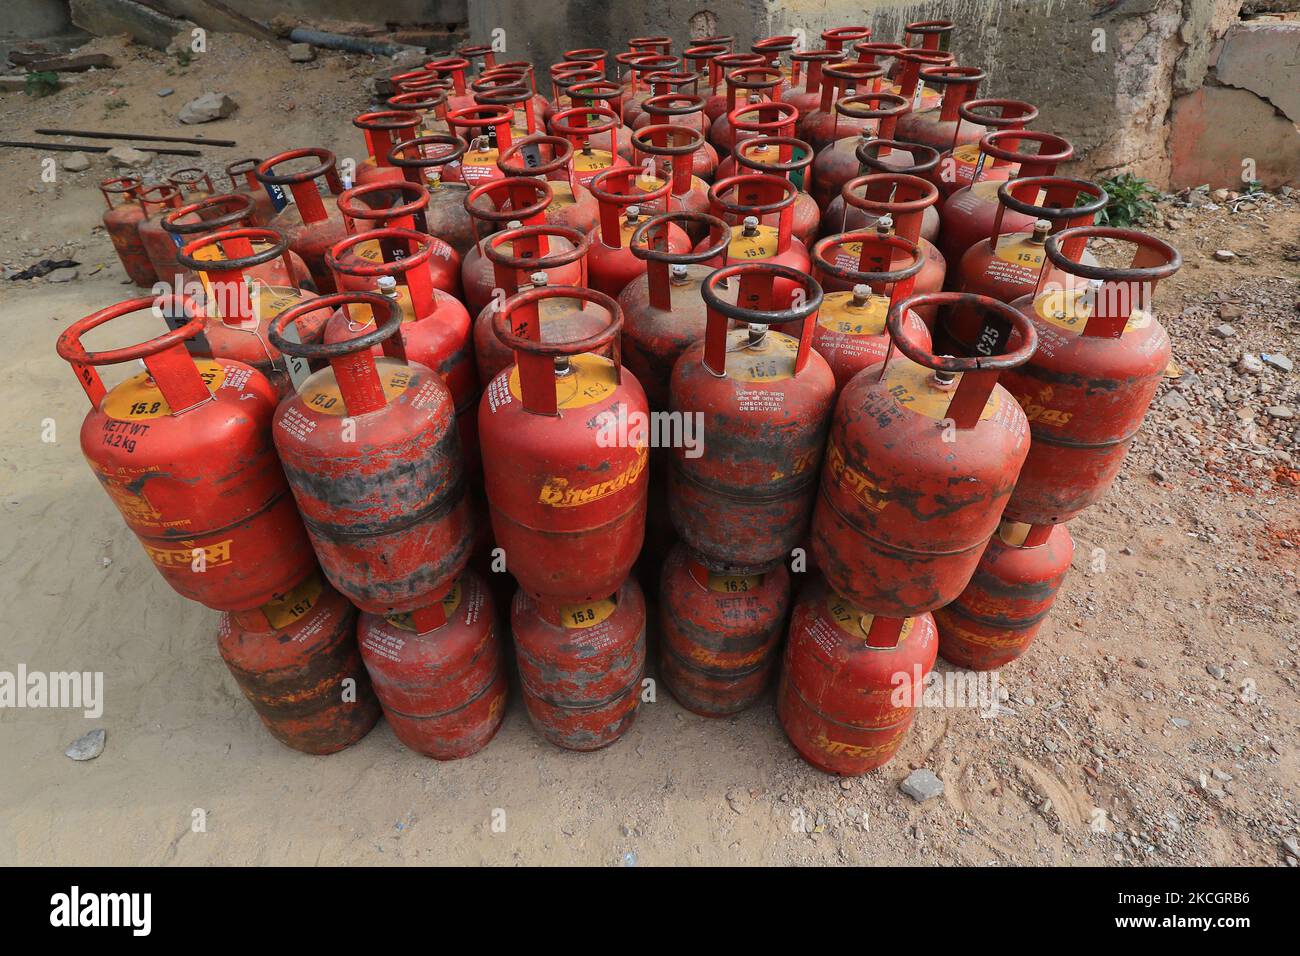 LPG gas cylinders unloaded from a truck, in Jaipur, Rajasthan, India, on July 2, 2021. The price of non-subsidised LPG cylinders hiked by Rs 25.50 and commercial LPG cylinders hiked by Rs 84. (Photo by Vishal Bhatnagar/NurPhoto) Stock Photo